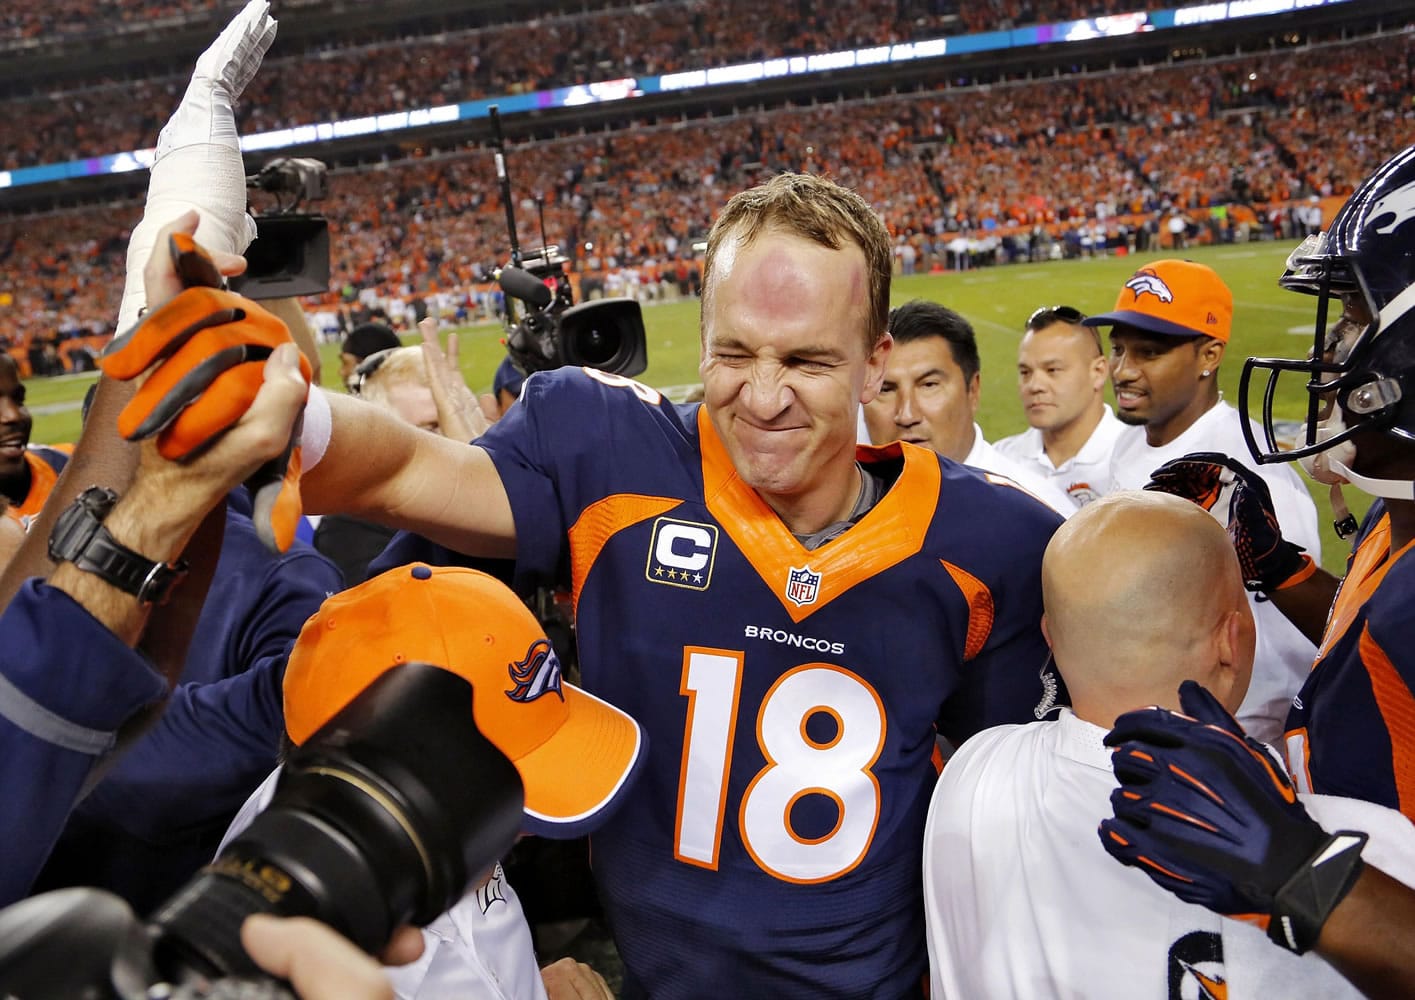 Denver Broncos quarterback Peyton Manning (18) celebrates his 509th career touchdown pass with teammates during the first half against the San Francisco 49ers on Sunday, Oct. 19, 2014, in Denver.